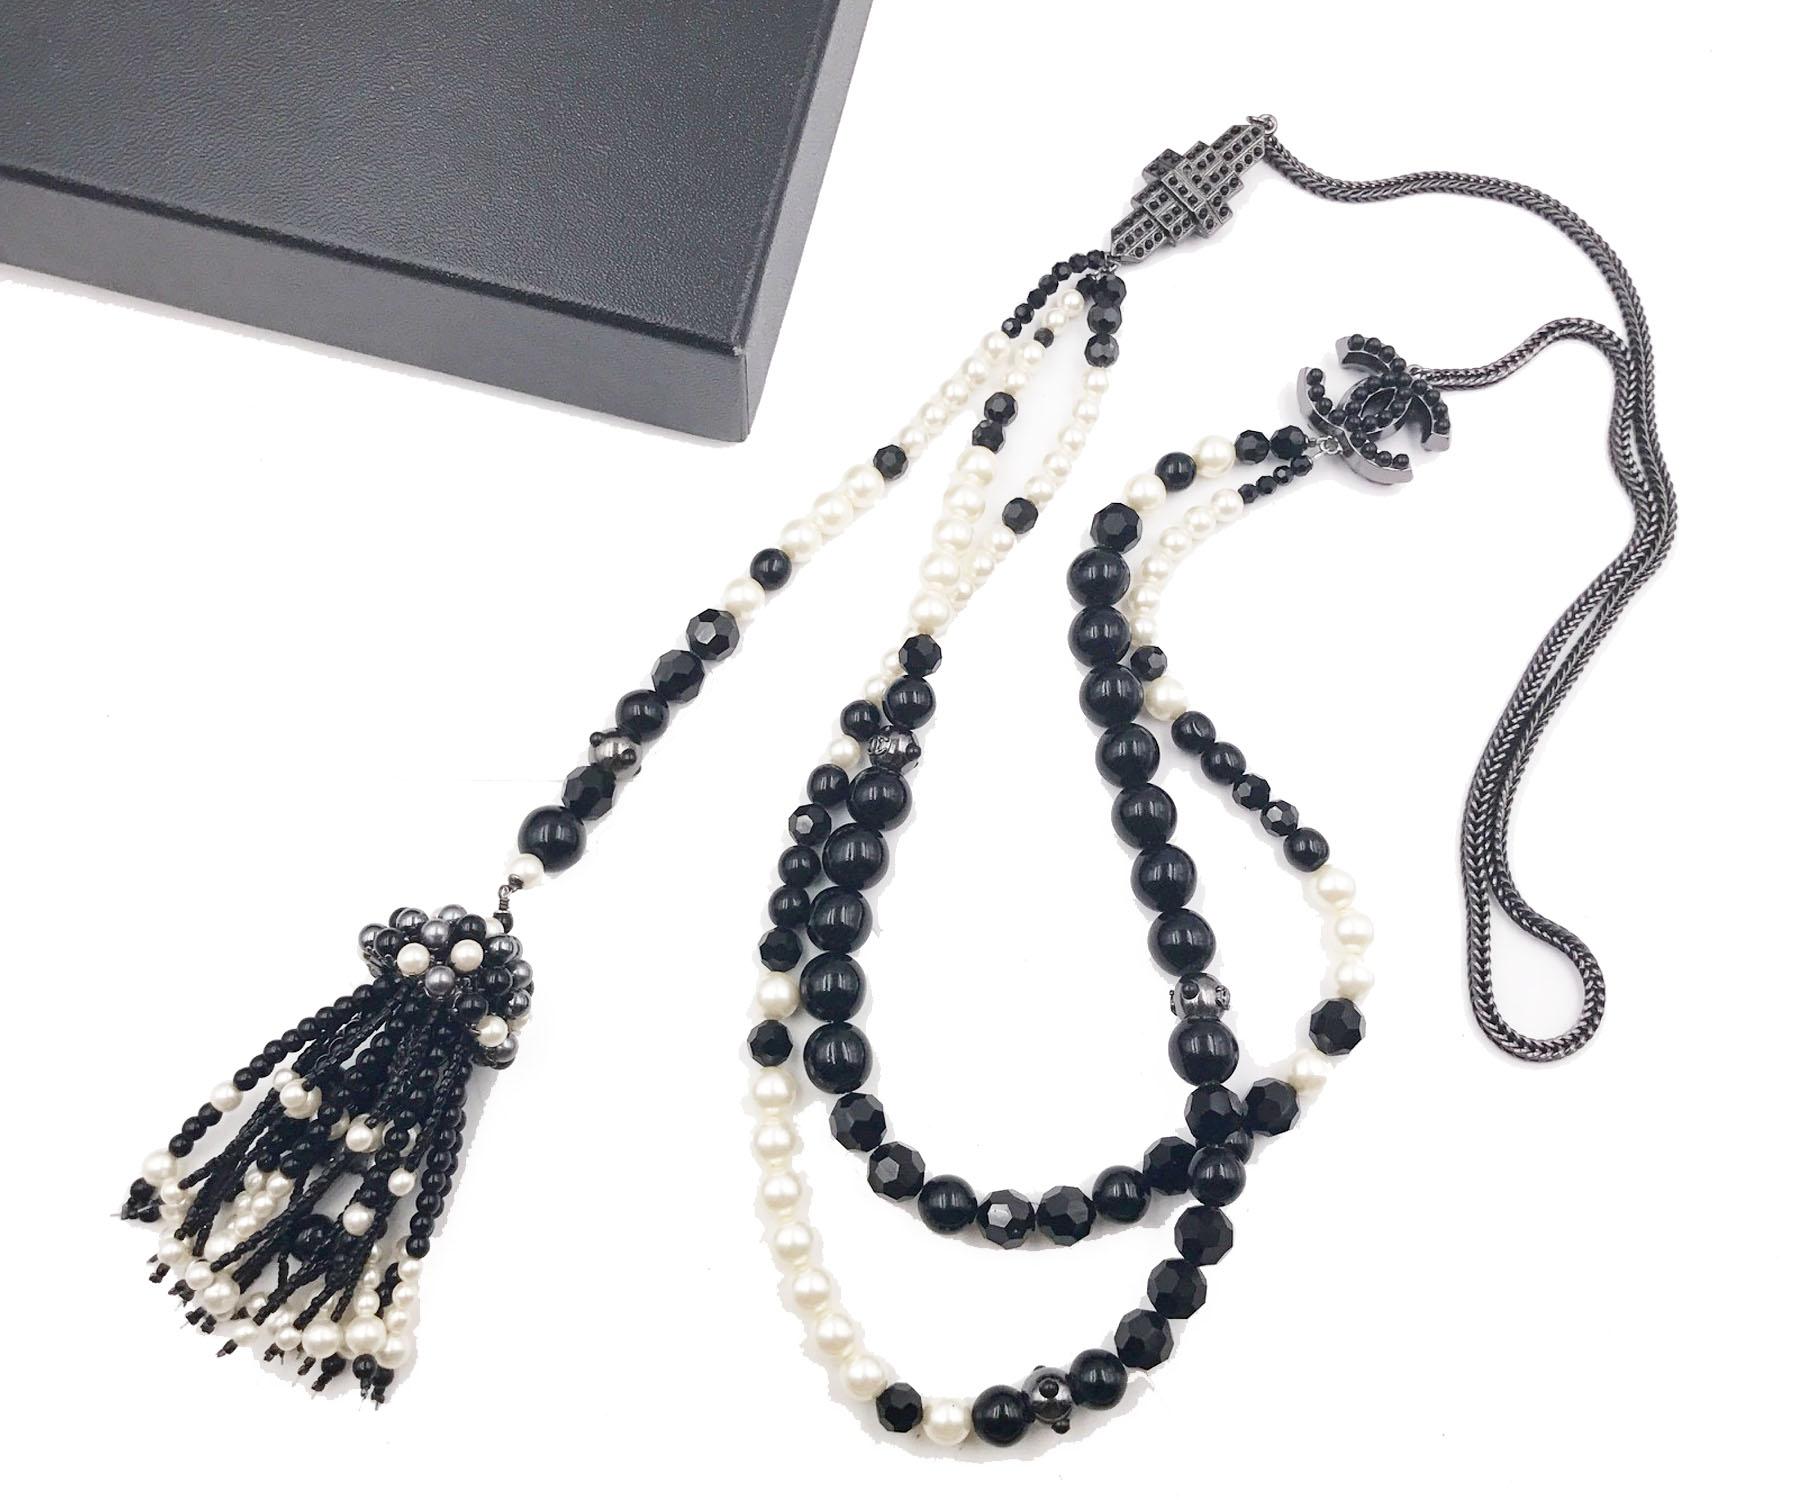 Chanel Rare Black Stone Pearl Dangle Tassel Necklace

* Marked 02
* Made in France
* Comes with the original box

-The tassel is approximately 10″ long.
-The necklace approximately 36″.
-Very unique and rare
-It is missing one small black bead, but